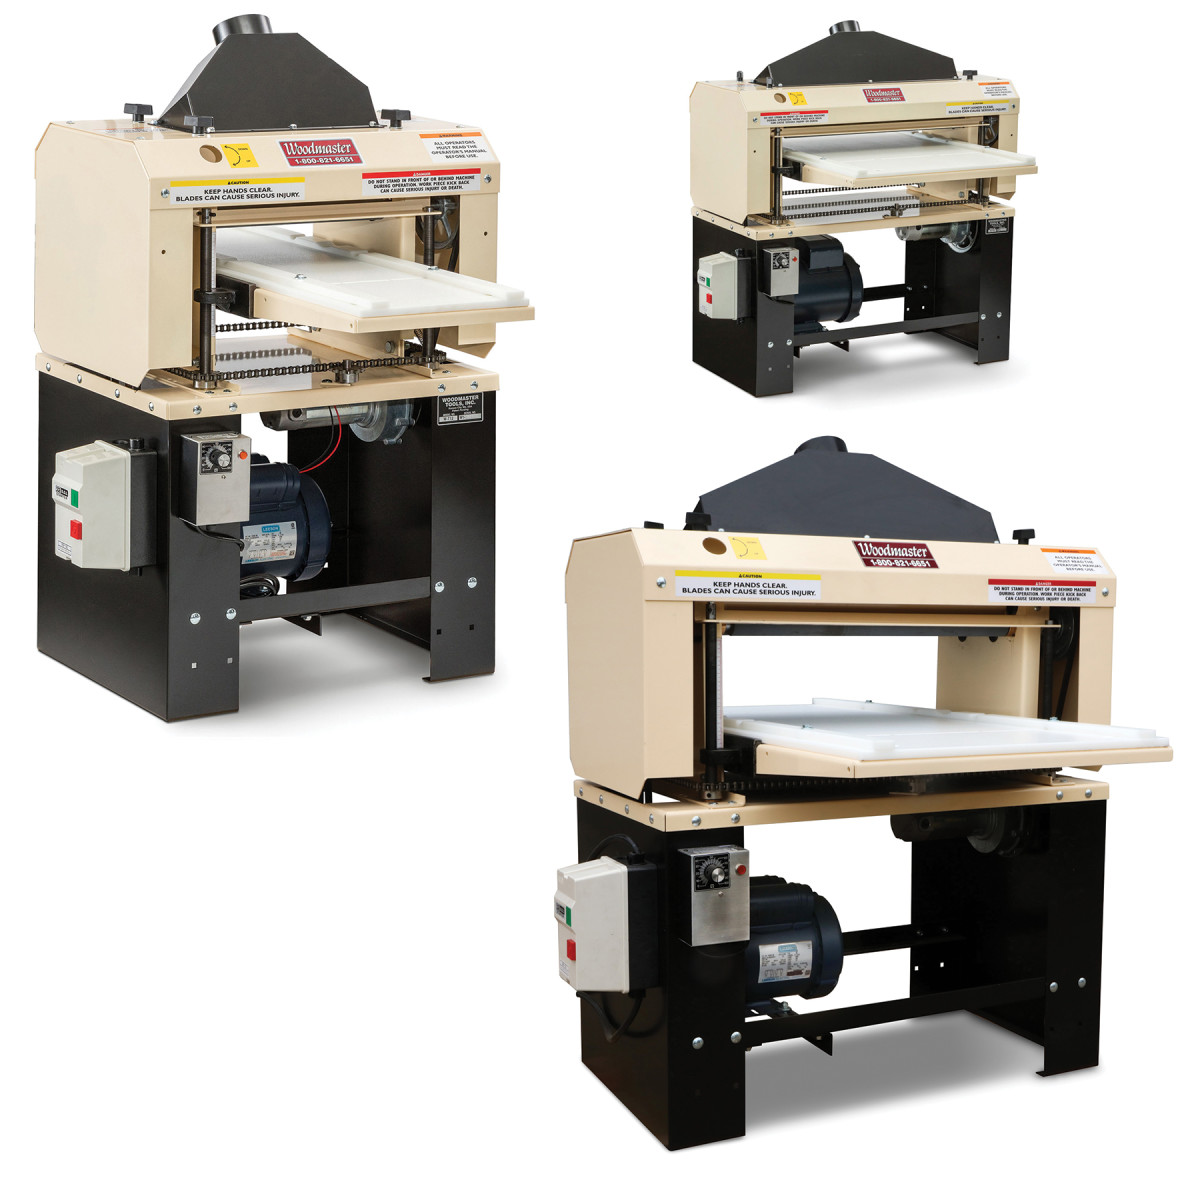  Four-function machines from Woodmaster Tools